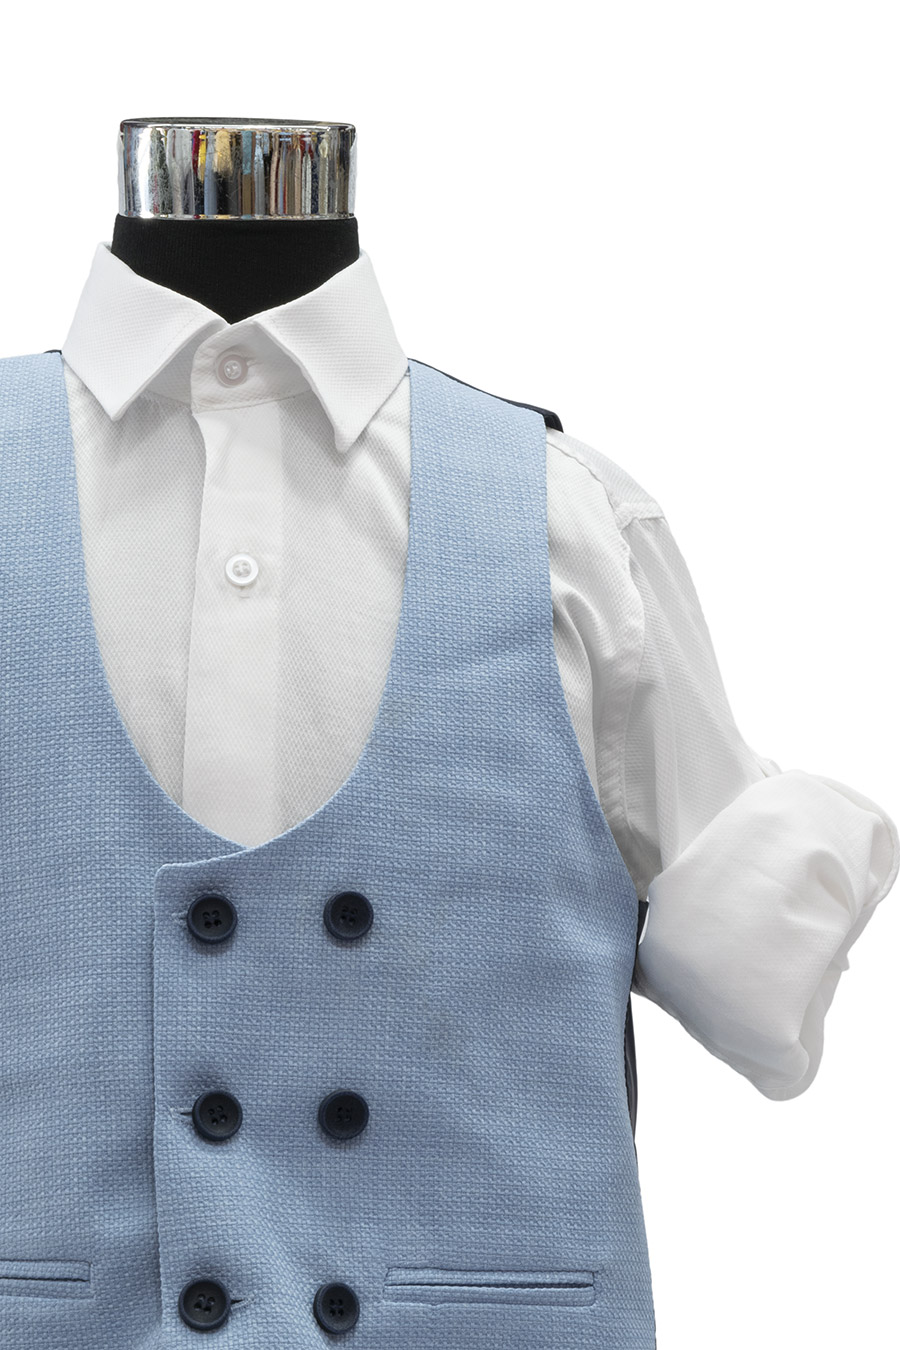 light blue vest with navy buttons and white roll up shirt